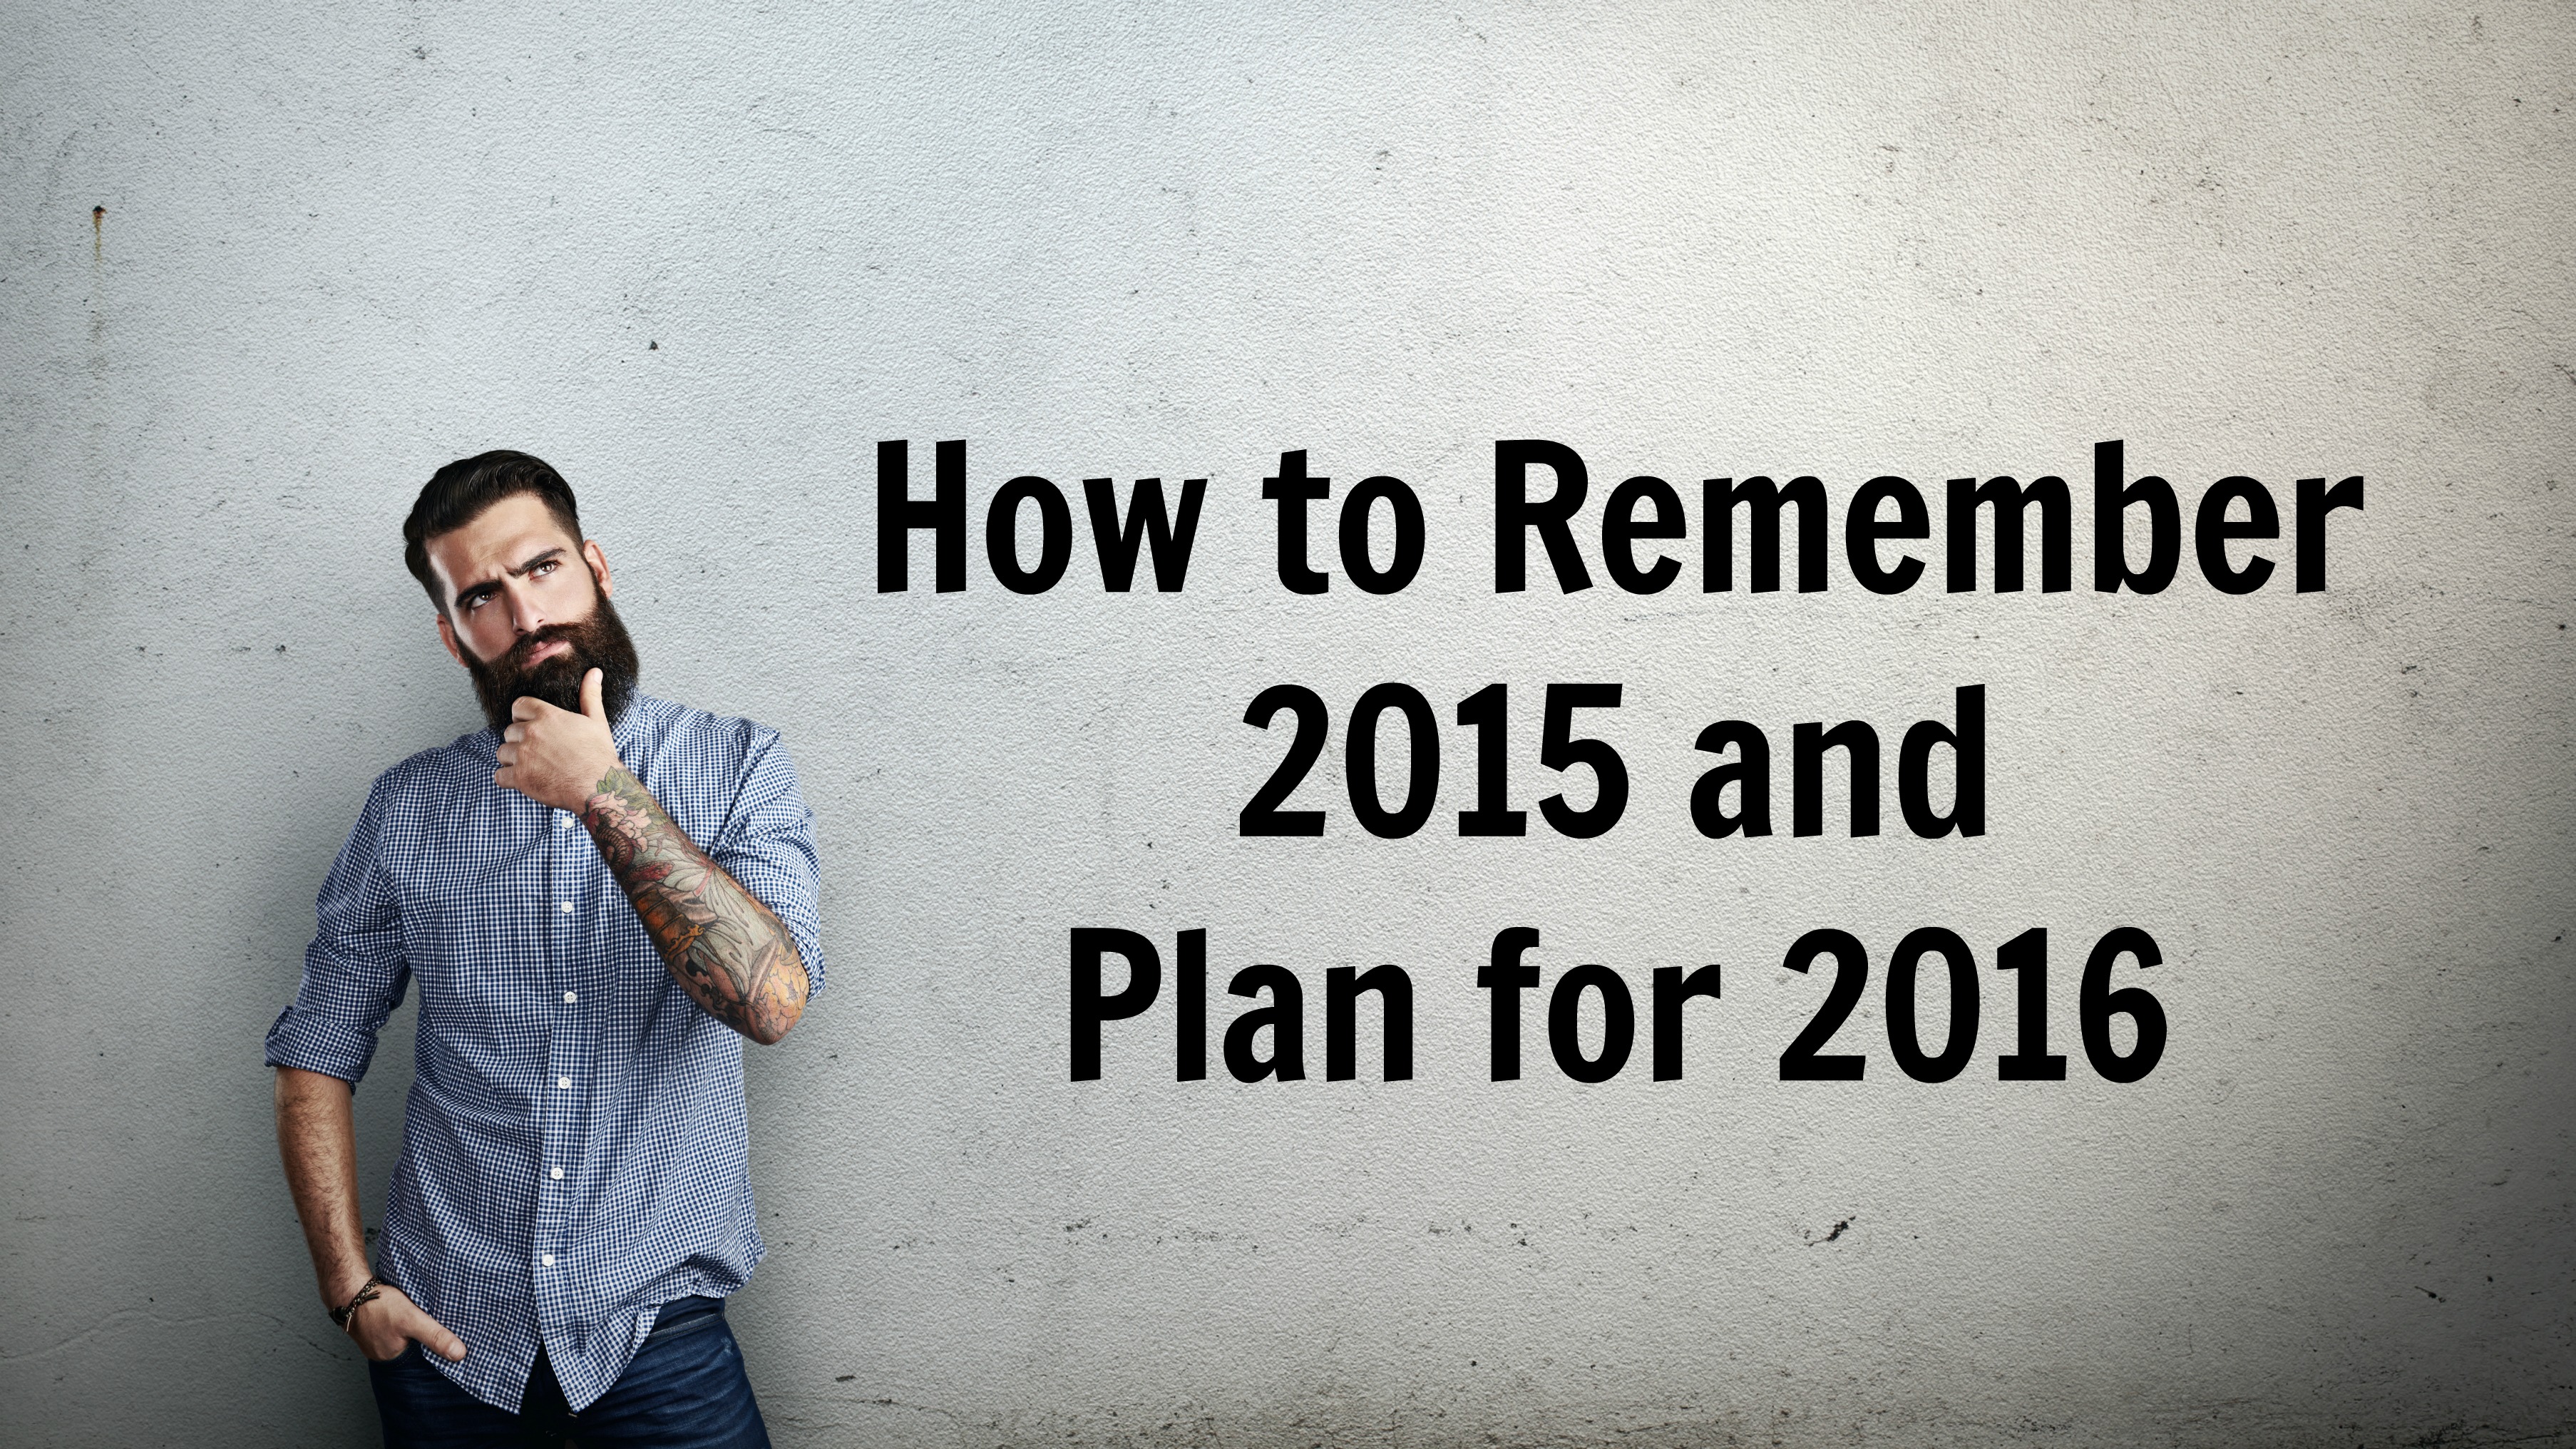 How to Plan for 2016